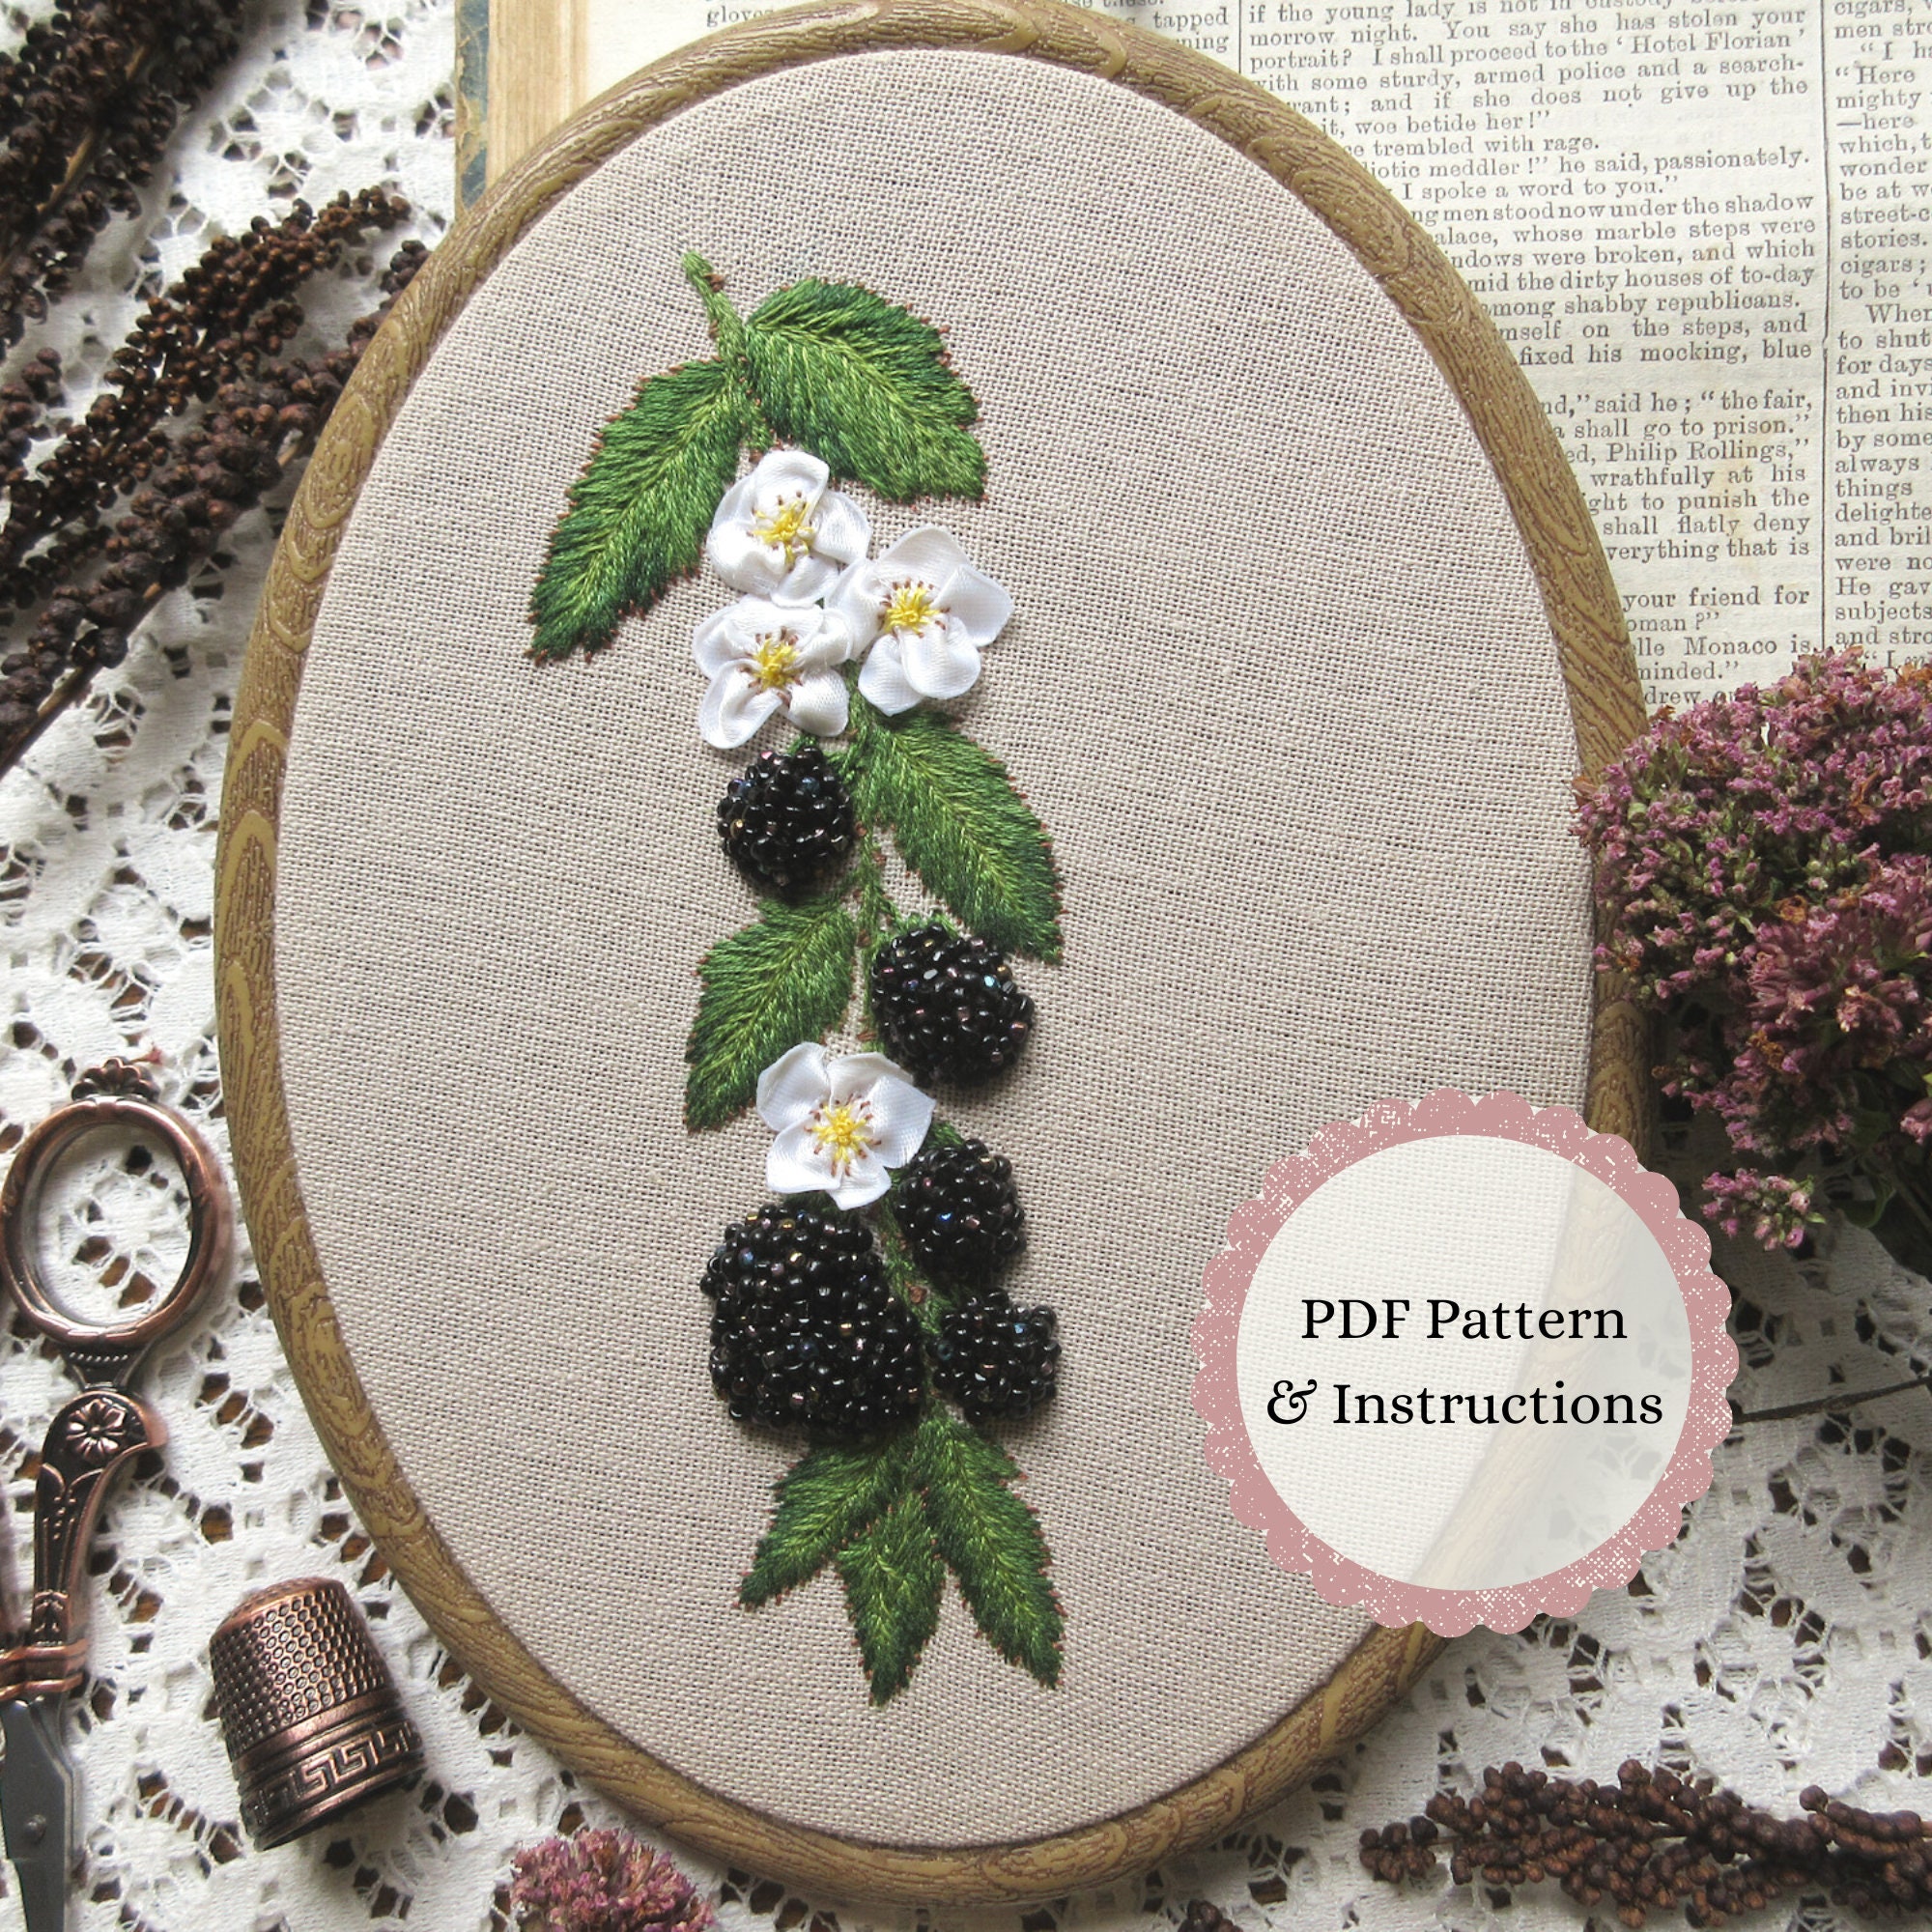 embroidery books Archives - The Diary of a Northern Belle